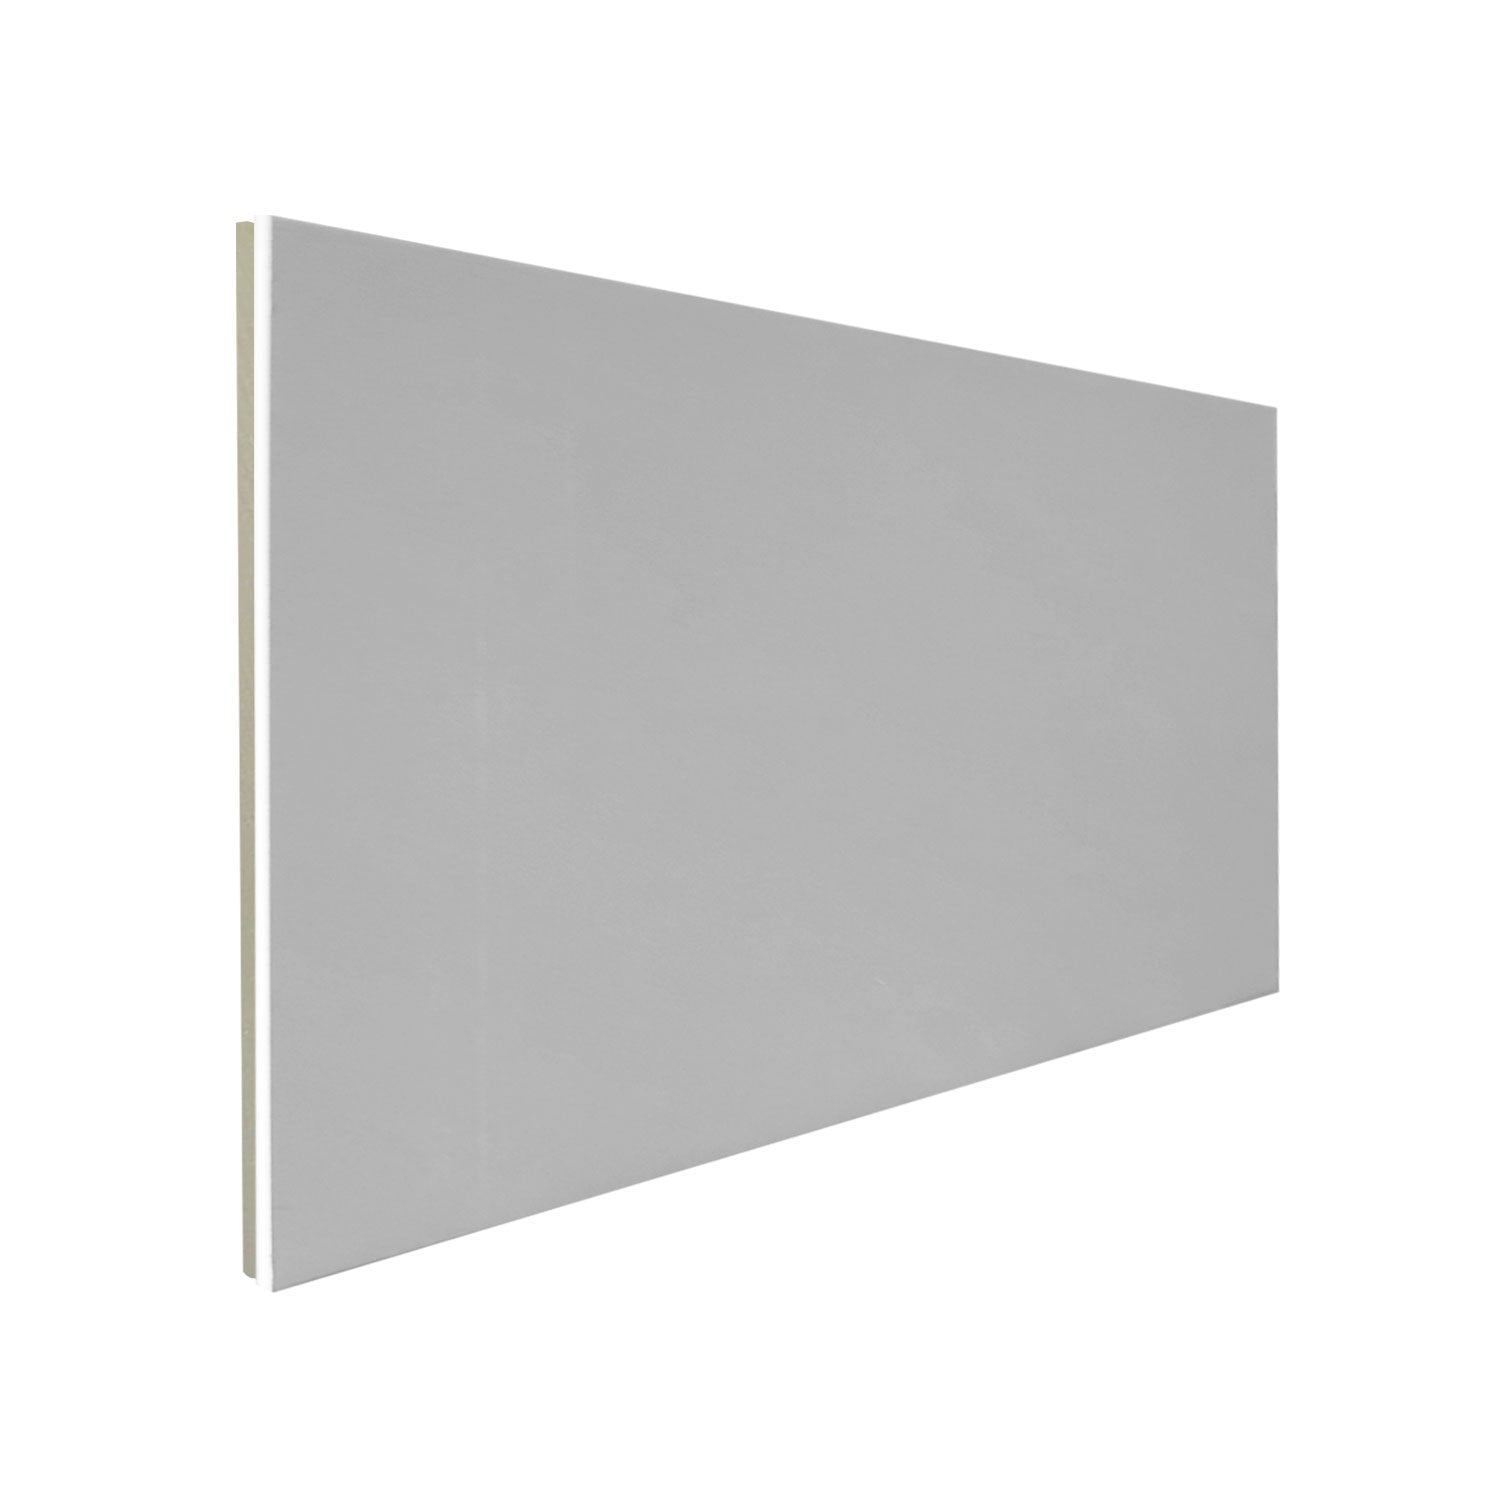 Thermal Check Plasterboard 8' x 4' x 30mm